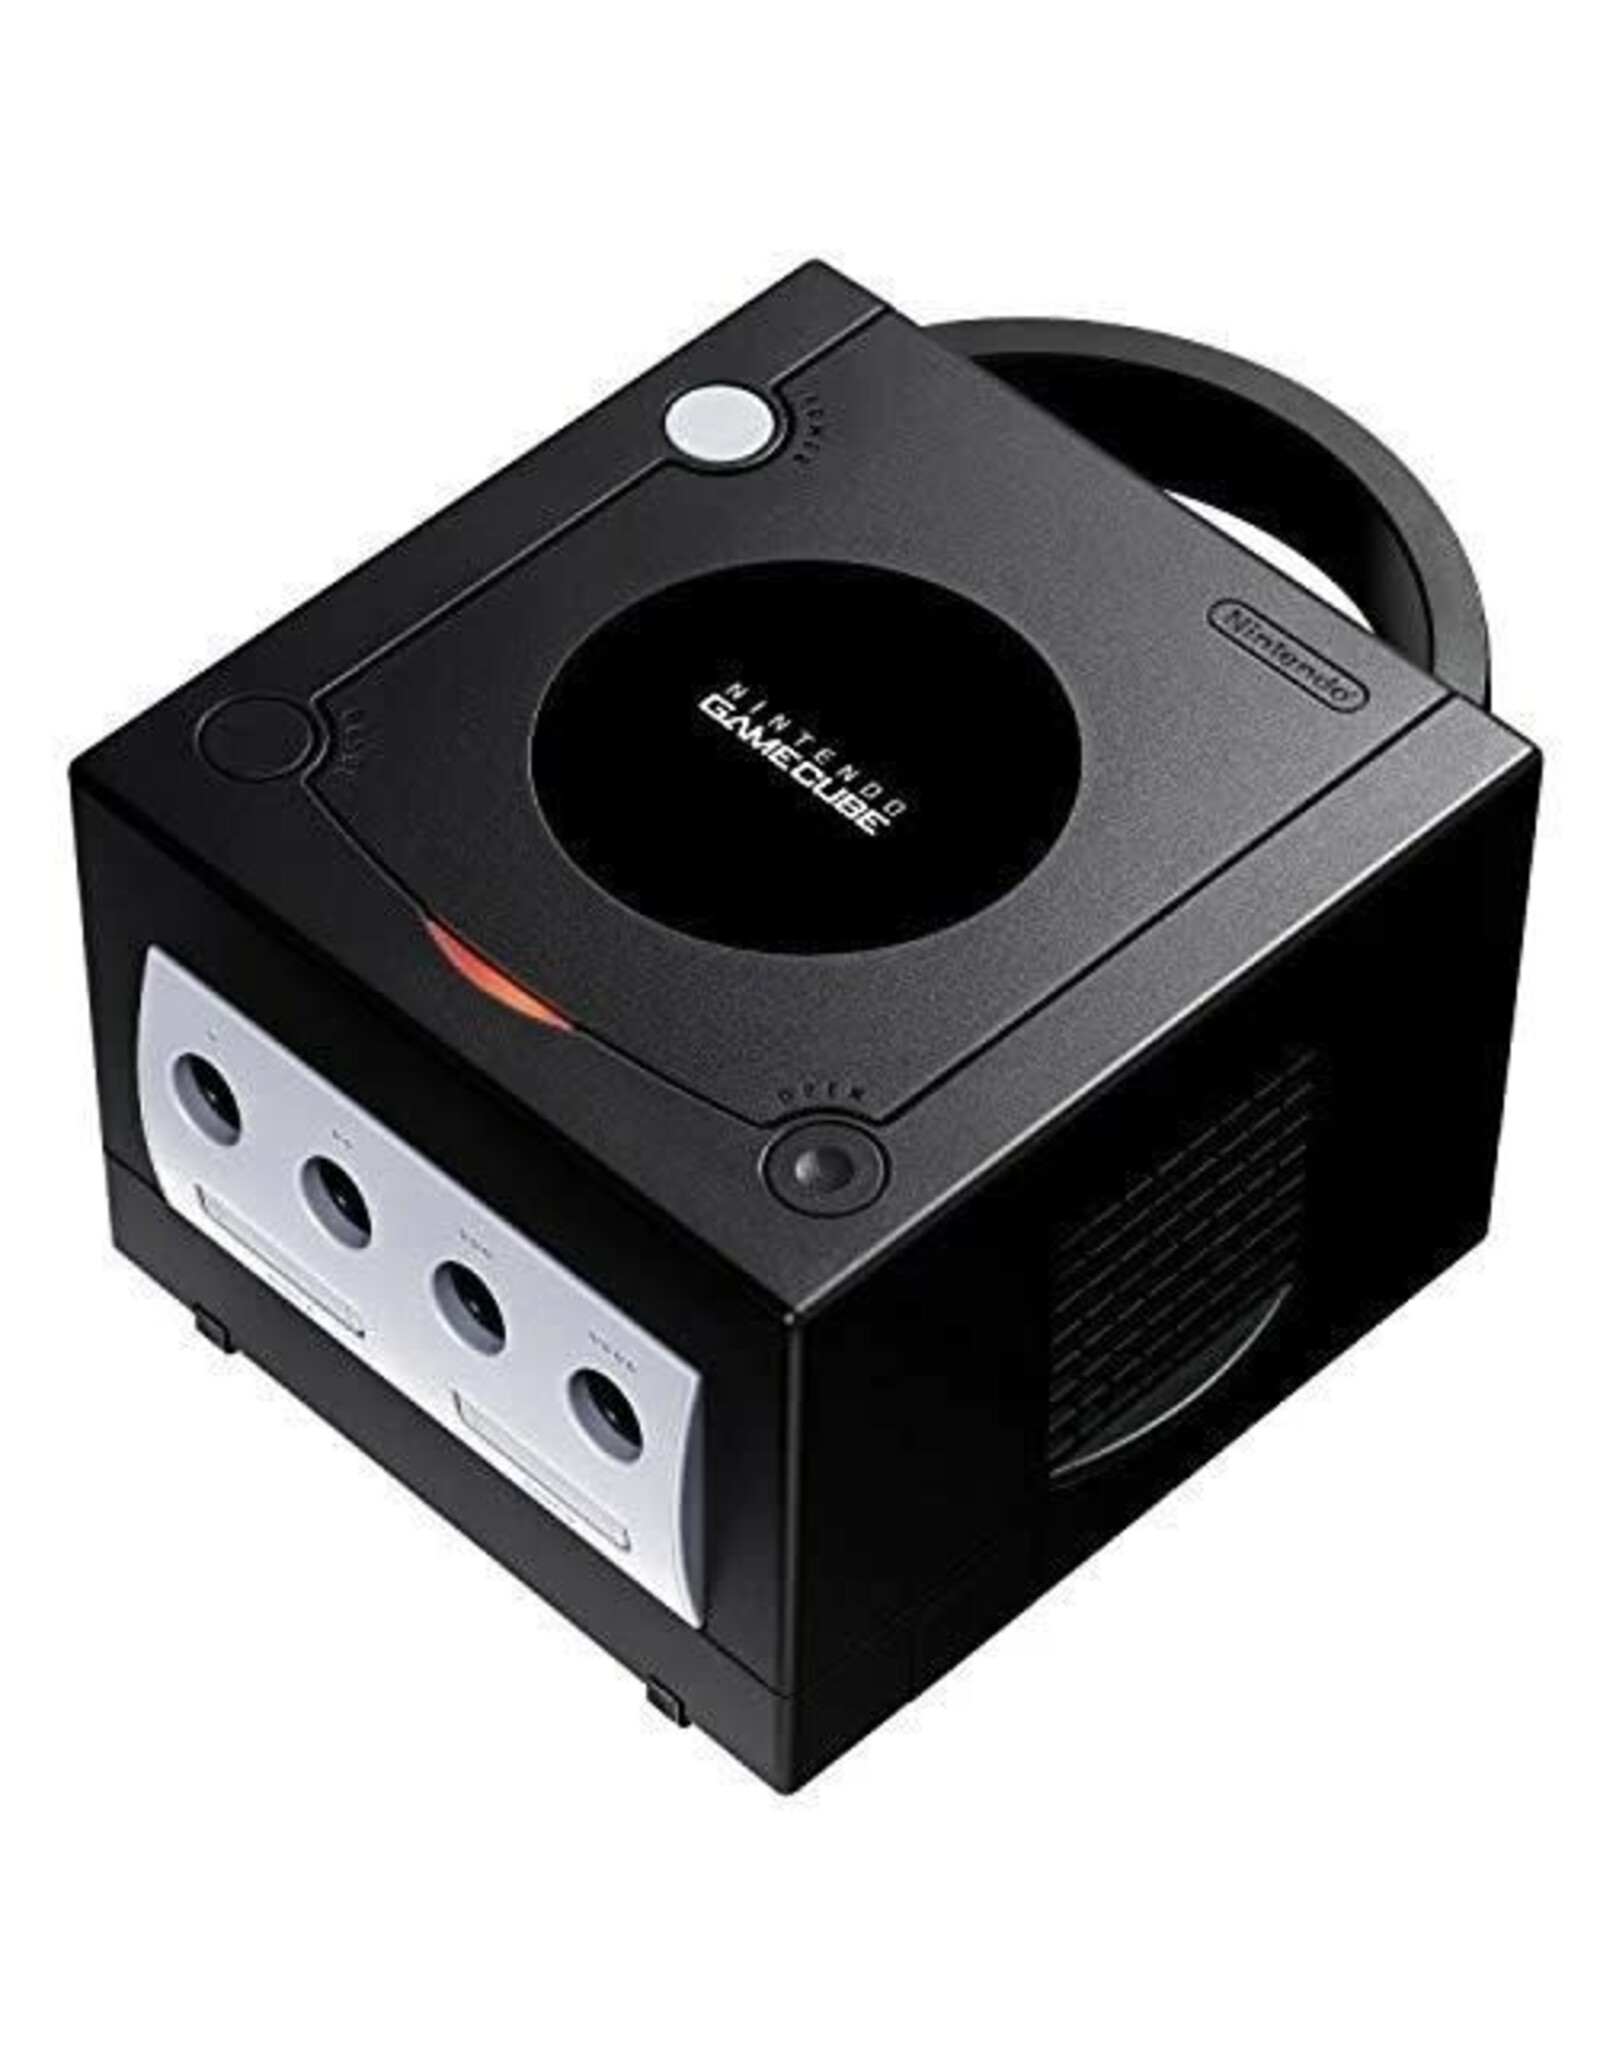 Gamecube GameCube Digital AV Out Console - Black, New 3rd Party Controller (Used, Cosmetic Damage)